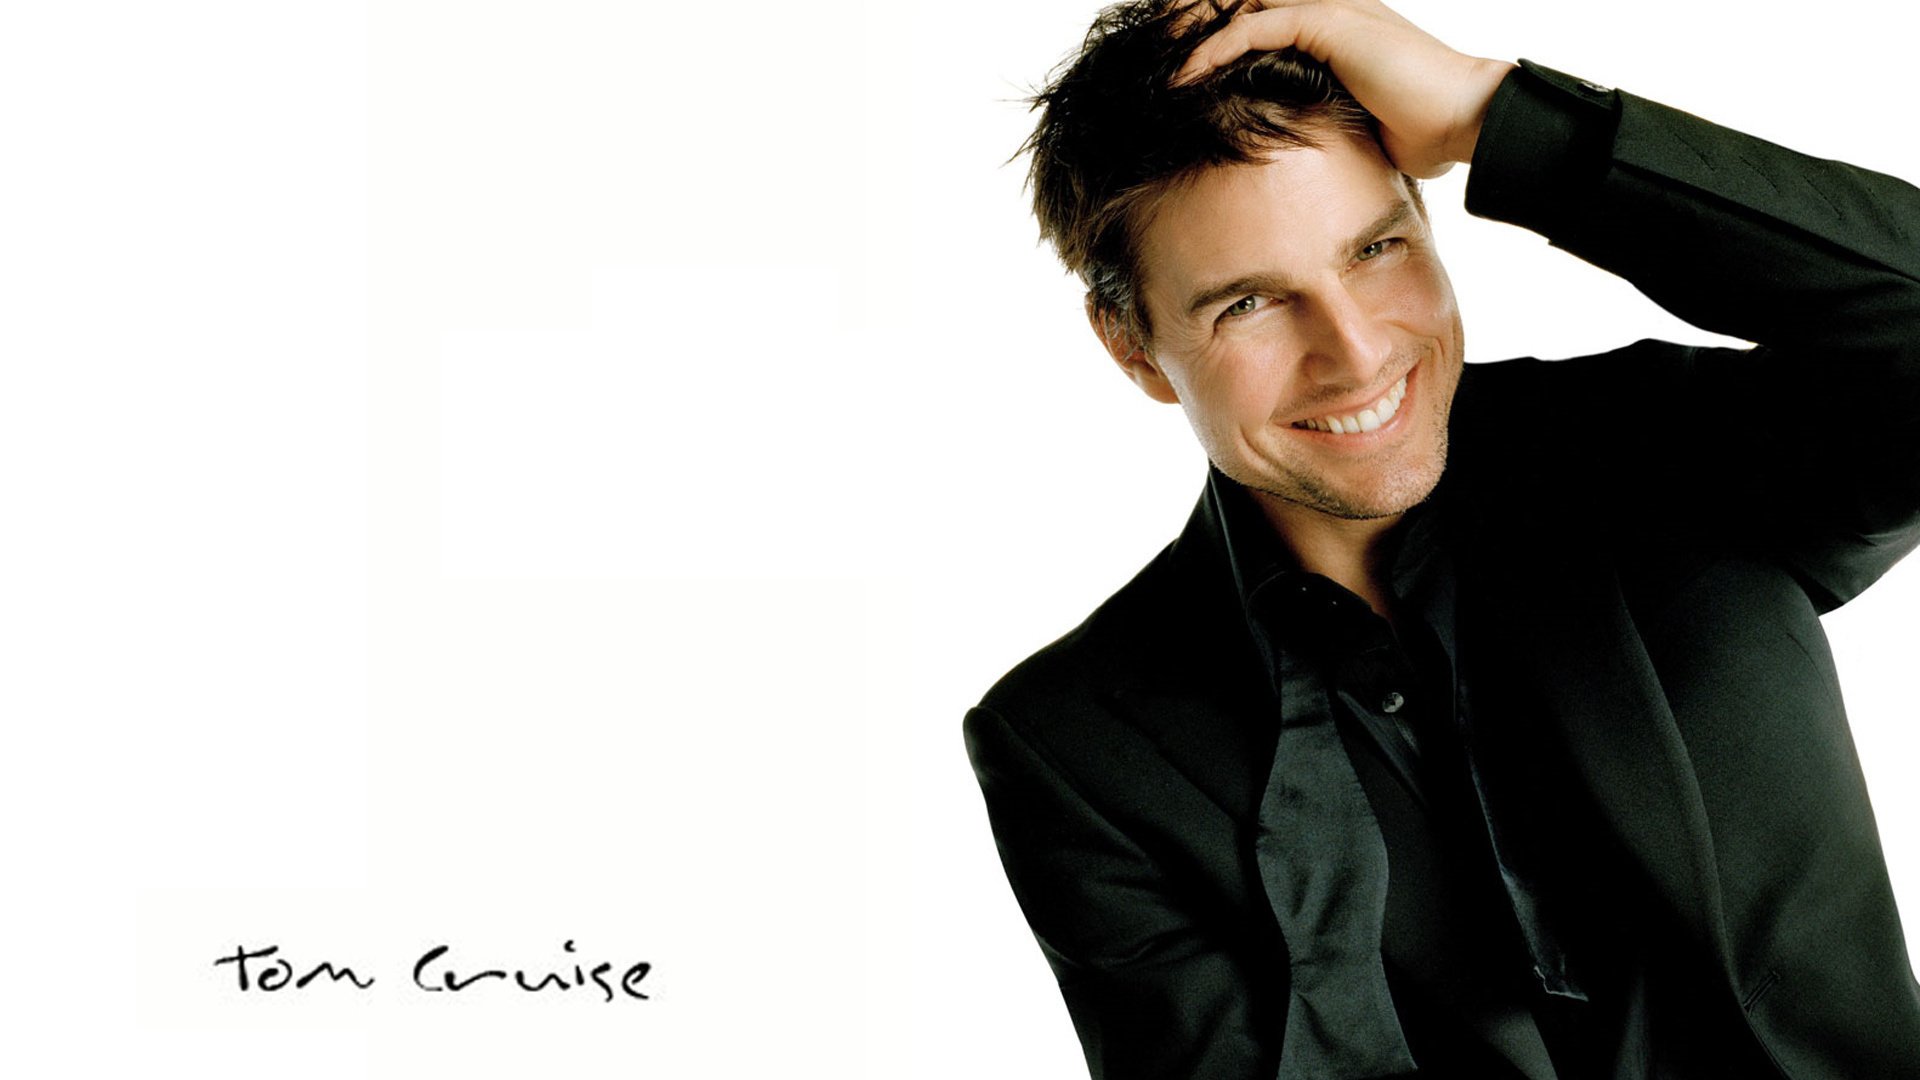 Tom Cruise HD Wallpaper Background Image